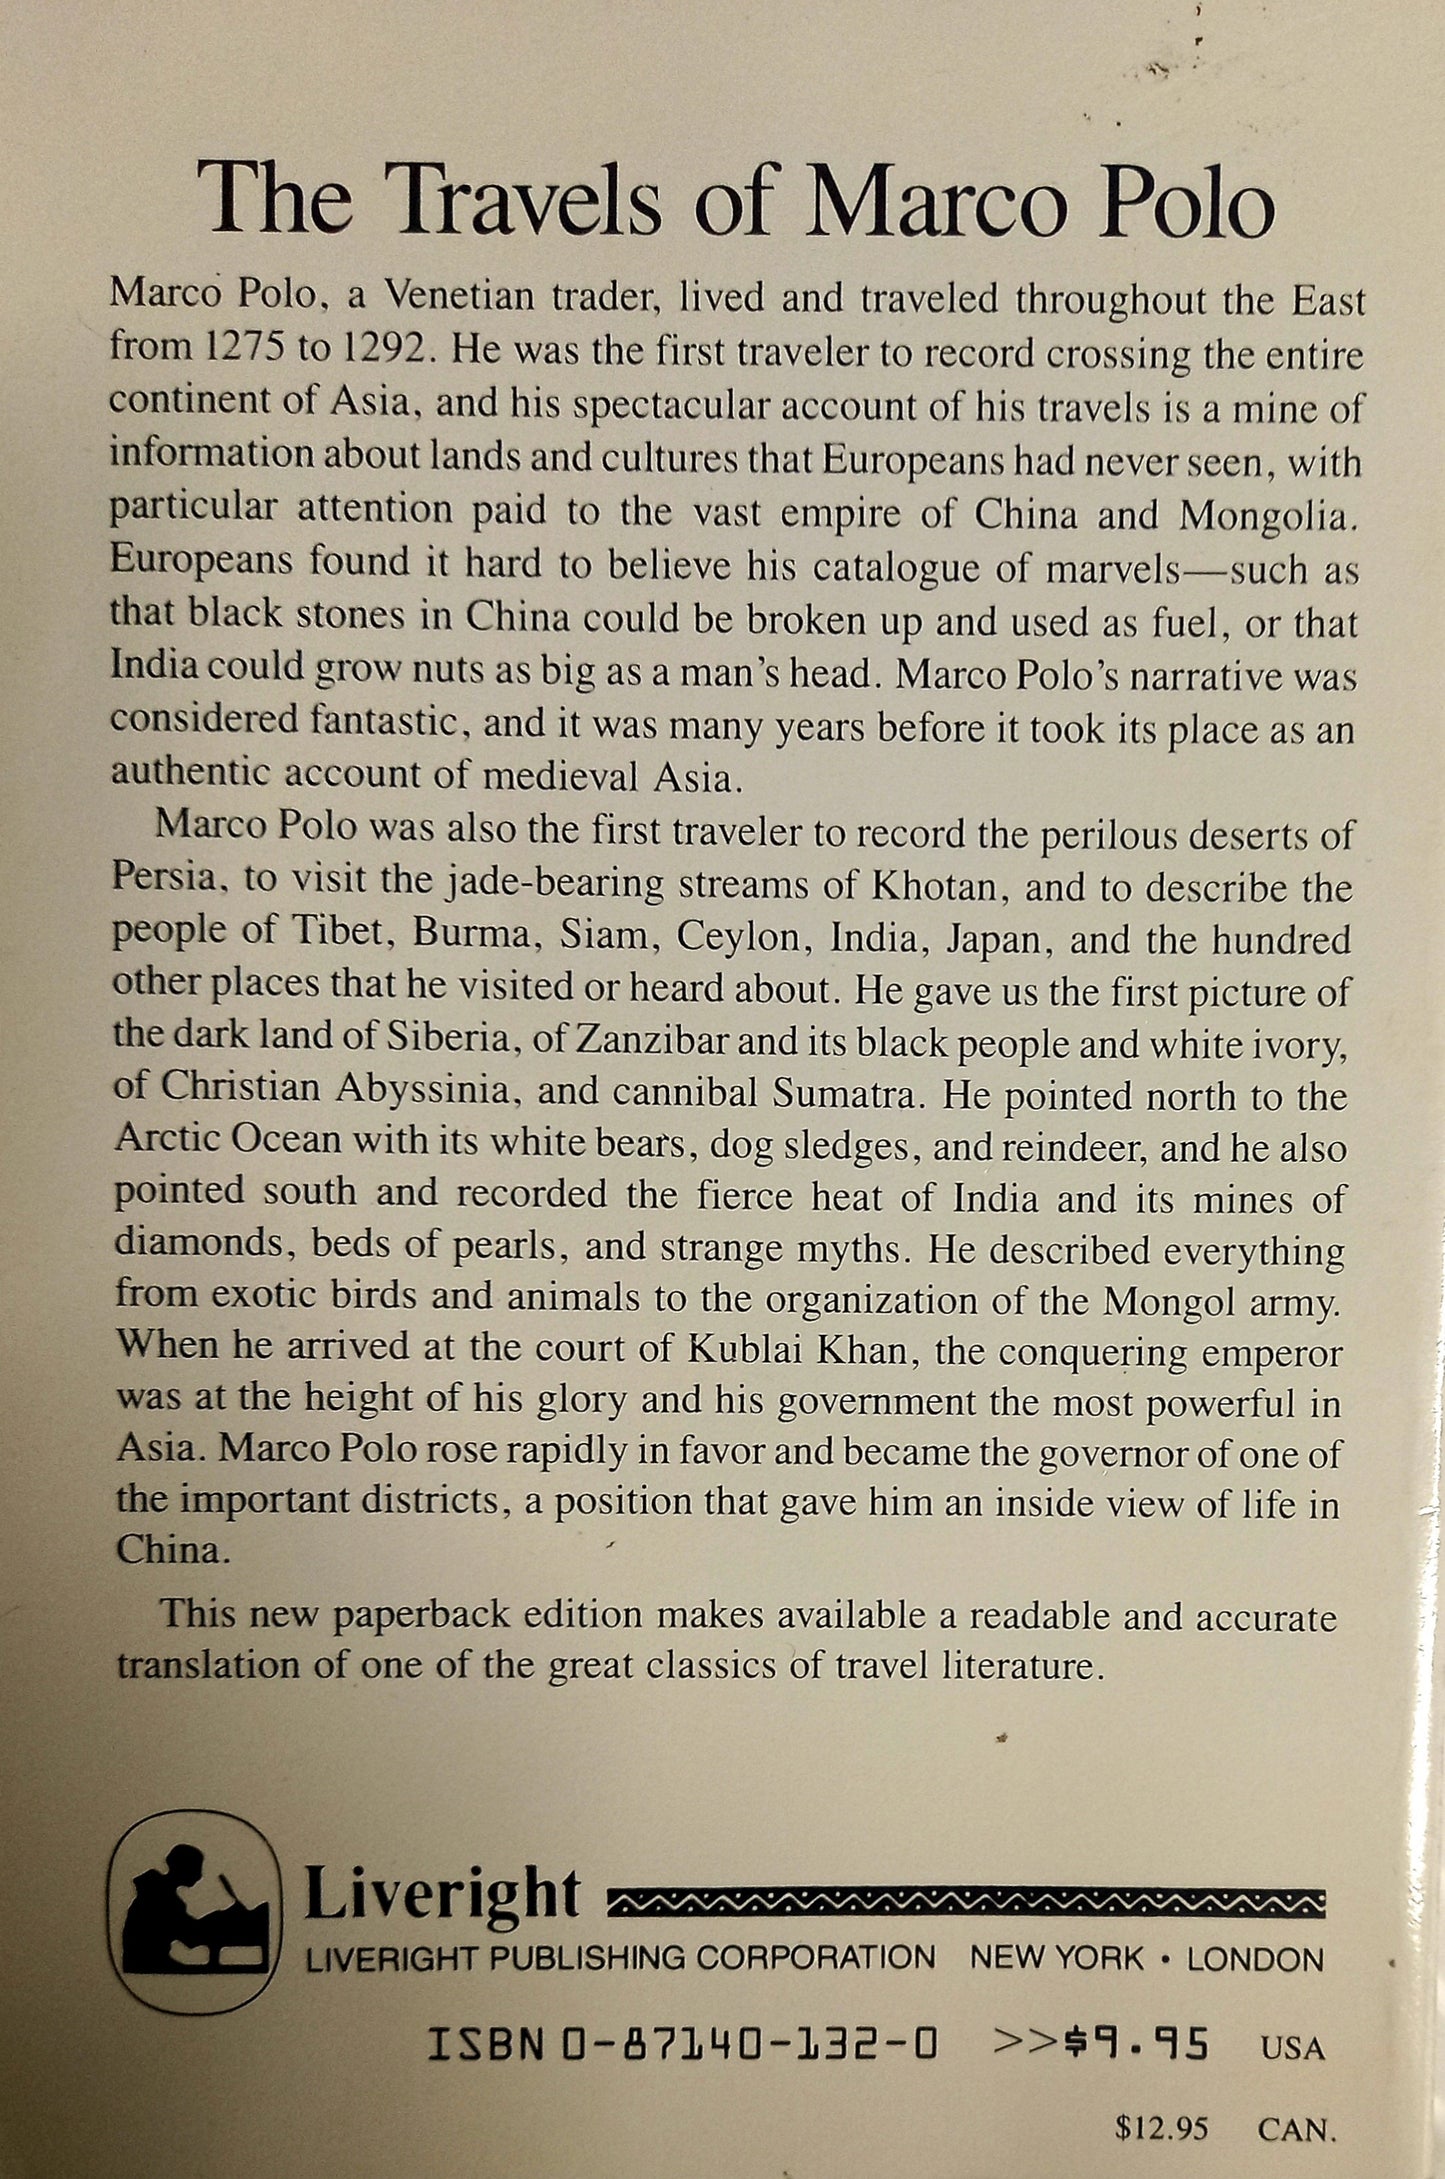 The Travels of Marco Polo [The Venetian]